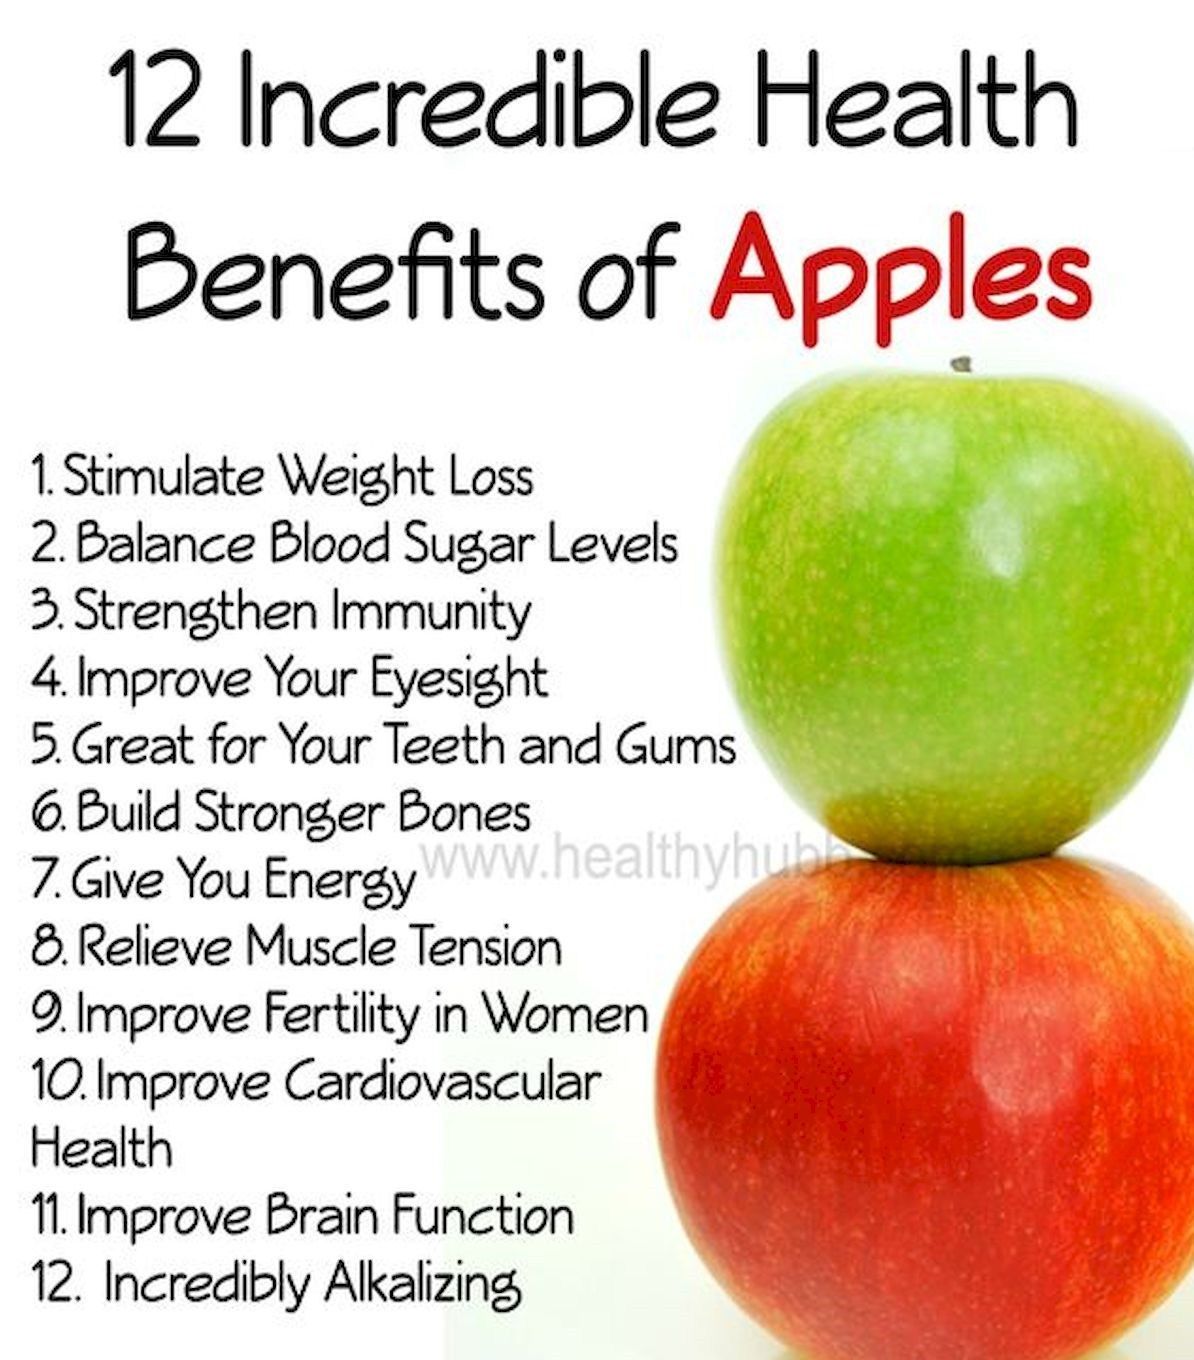 “An Apple a Day: The Top Health Benefits You Need to Know!”